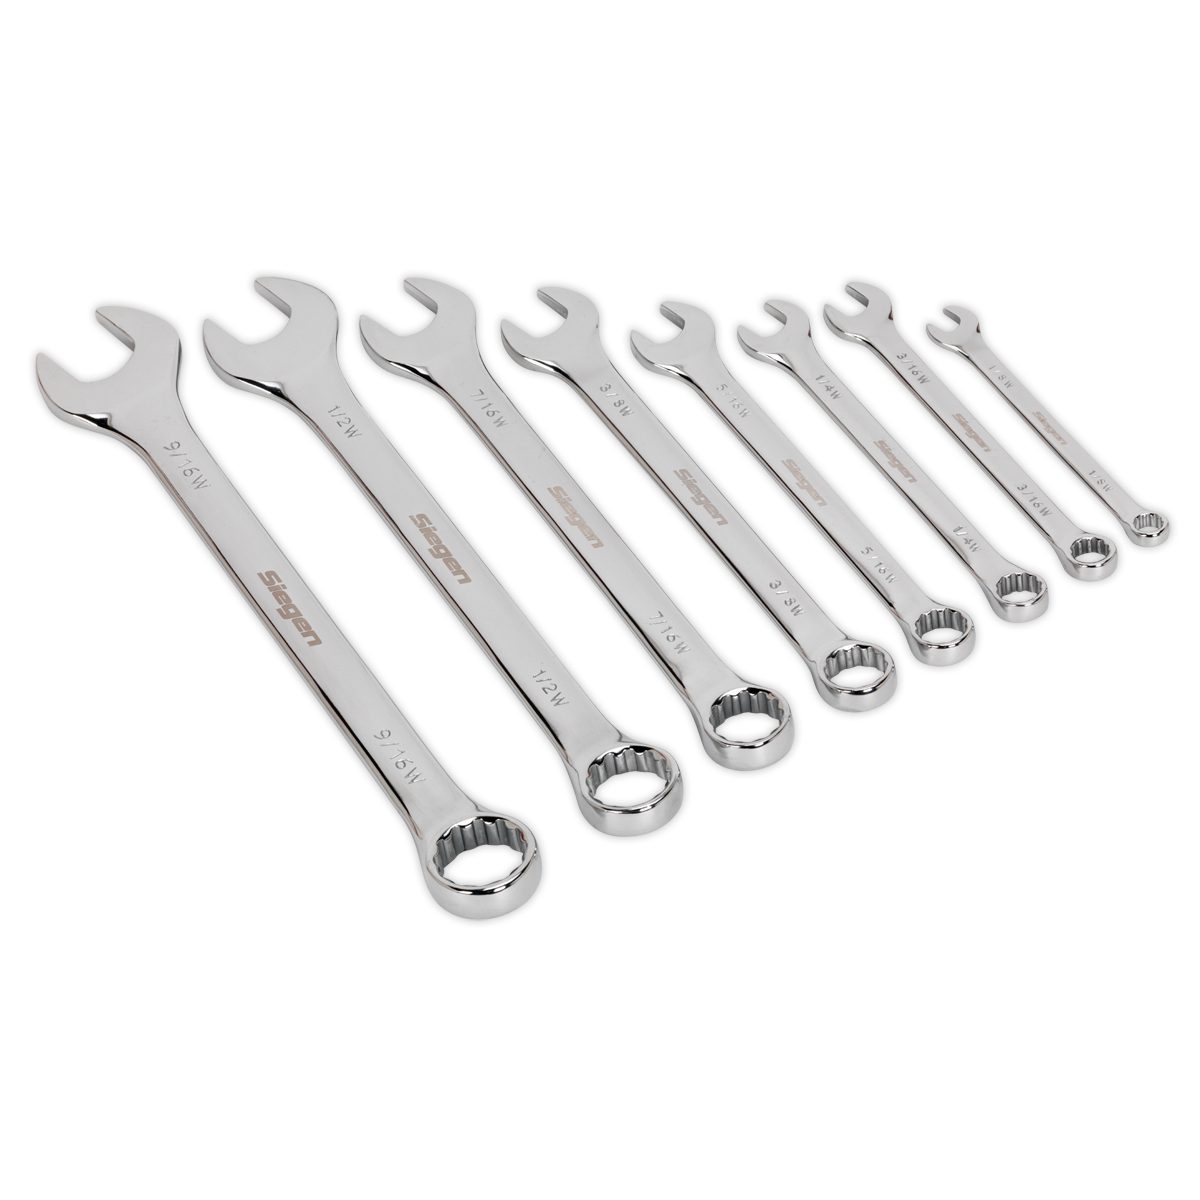 SEALEY - S0870 Combination Spanner Set 8pc Whitworth